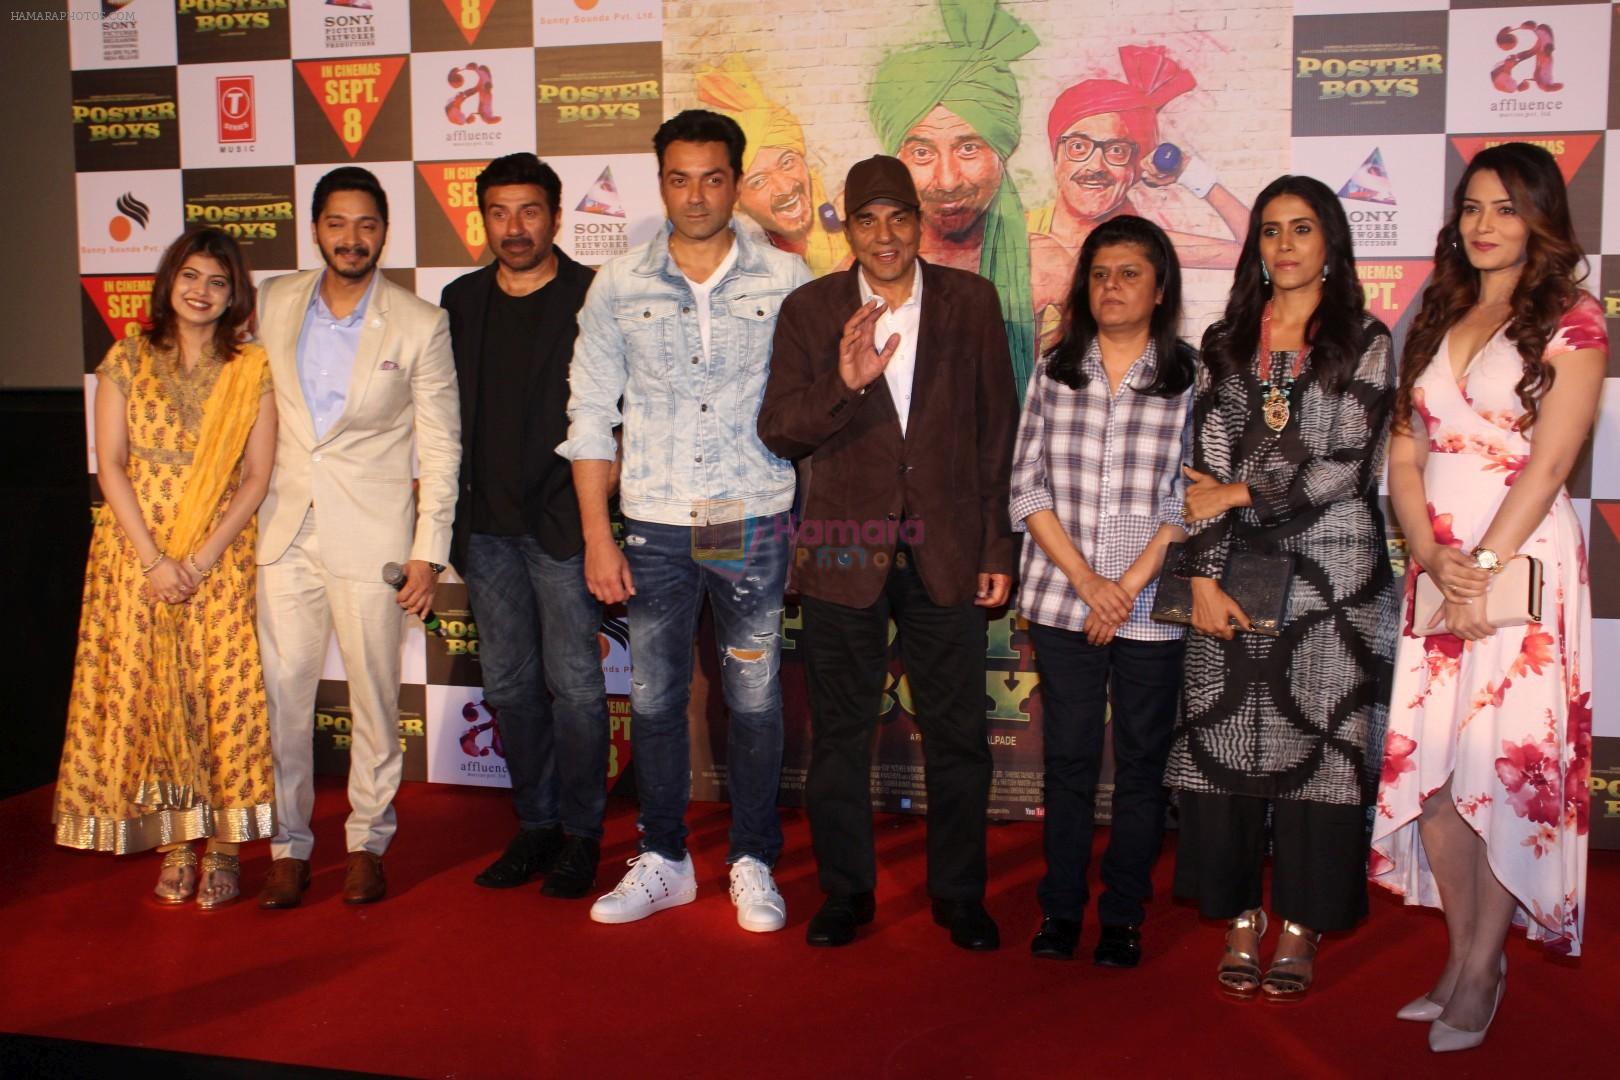 Shreyas Talpade, Dharmendra, Sunny Deol, Bobby Deol at the Trailer Launch Of Film Poster Boys on 24th July 2017